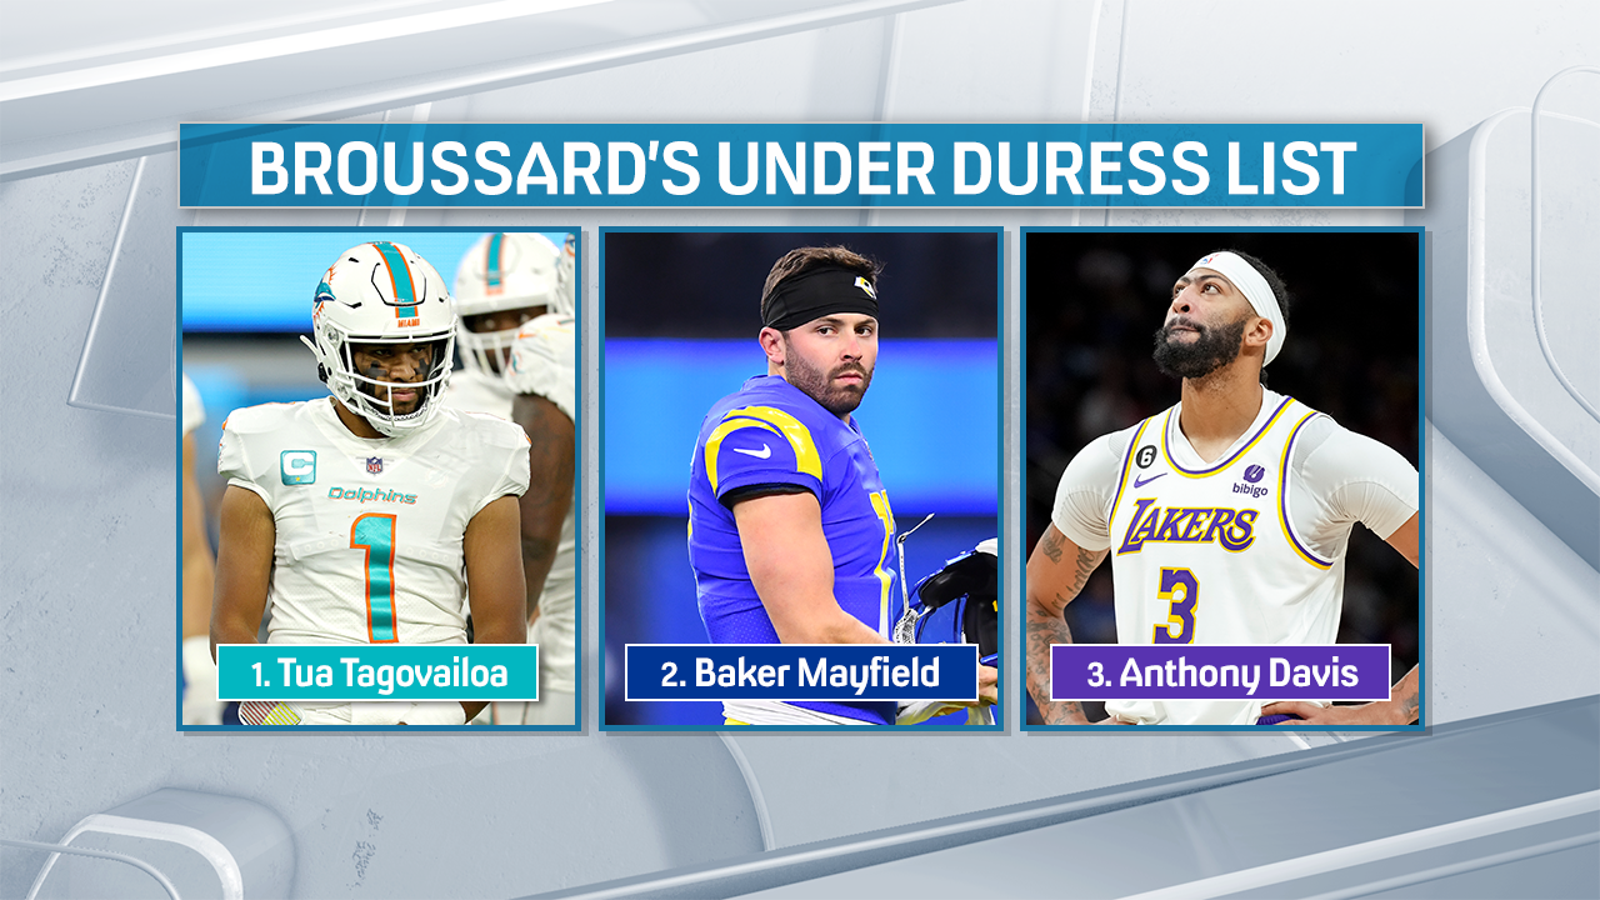 Tua, Baker Mayfield and AD are under duress according to the latest BUD list